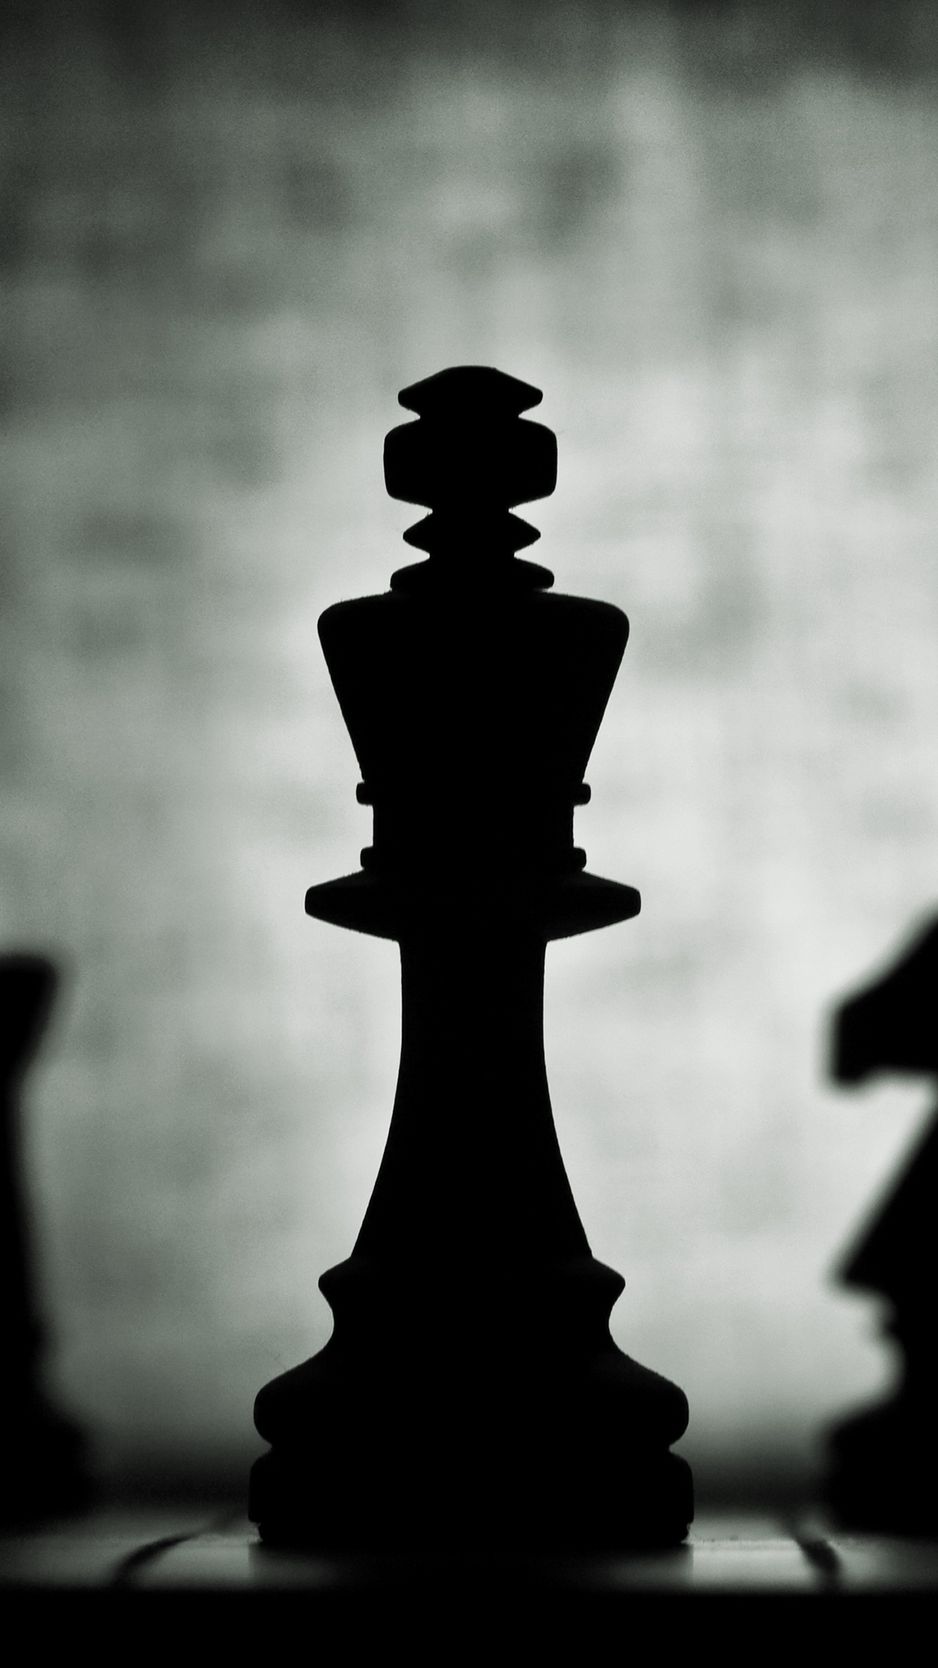 Download wallpaper 938x1668 chess, figures, dark, game, king iphone  8/7/6s/6 for parallax hd background